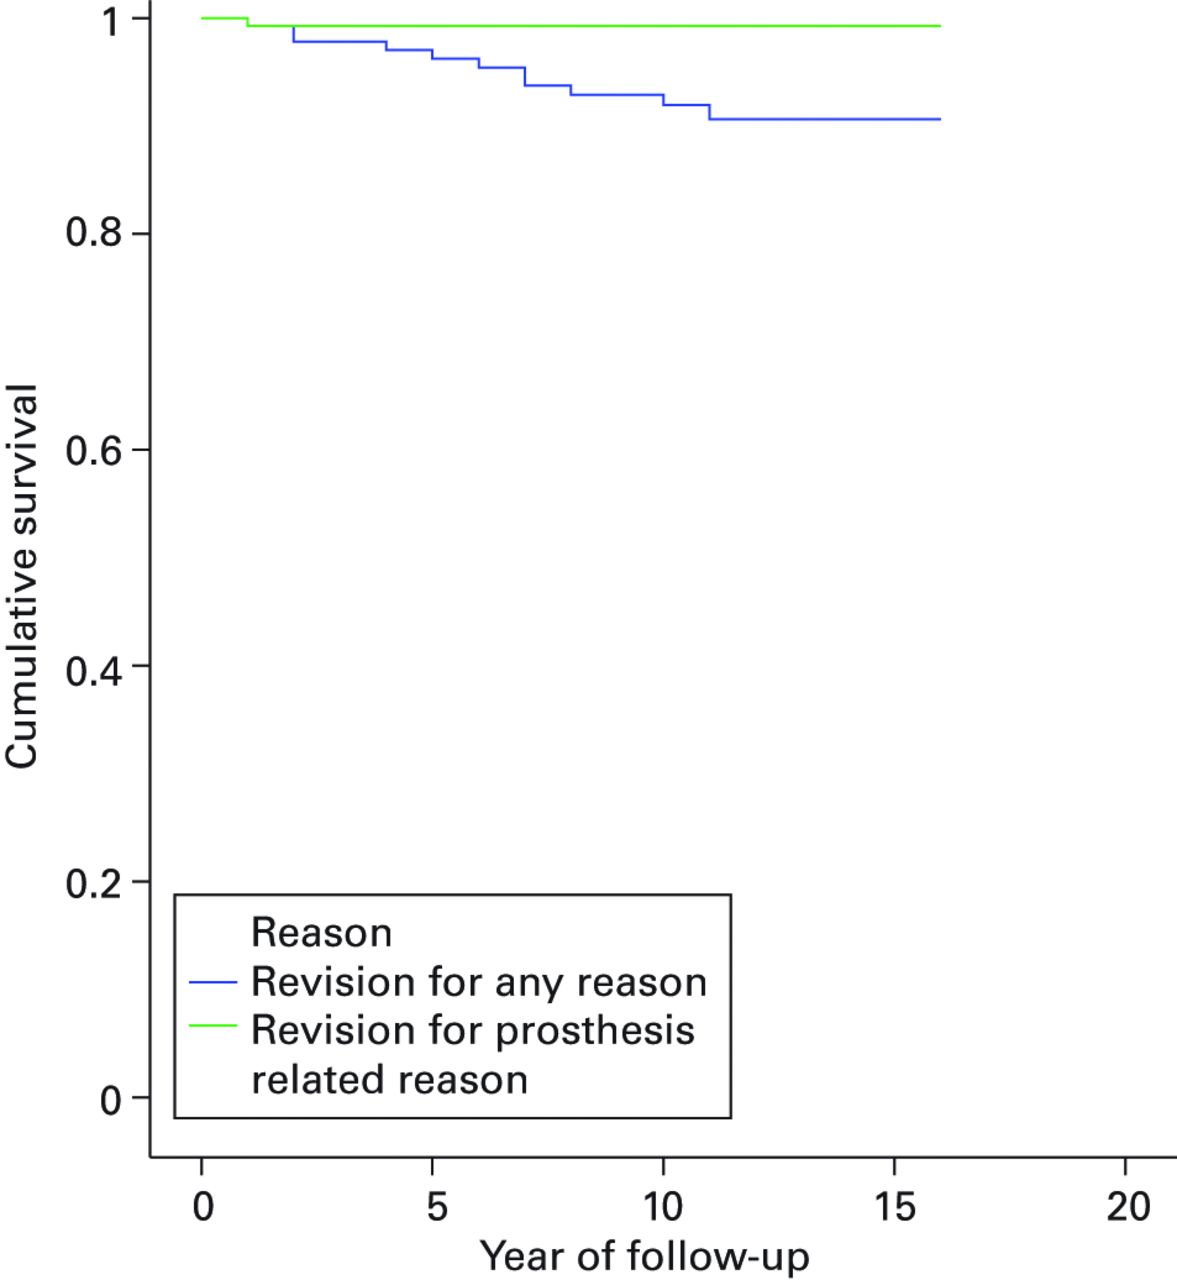 Fig. 1 
            Kaplan-Meier Estimates of Survival Function.
Survival based on revisions for any reason and for prosthesis specific
reasons. Revisions due to pain or disease progression were not considered
prosthesis related. Five year survival based on revision for any reason:
96.2% (95% confidence interval (CI): 93.0 to 99.5%). Seven year
survival based on revision for any reason: 93.8% (95% CI: 89.6 to
98.0%). Ten year survival based on revision for any reason: 91.6% (95%CI:
87.1 to 96.8%). 12 year survival based on revision for any reason: 90.6%
(95%CI: 85.2 to 96.0%).
          